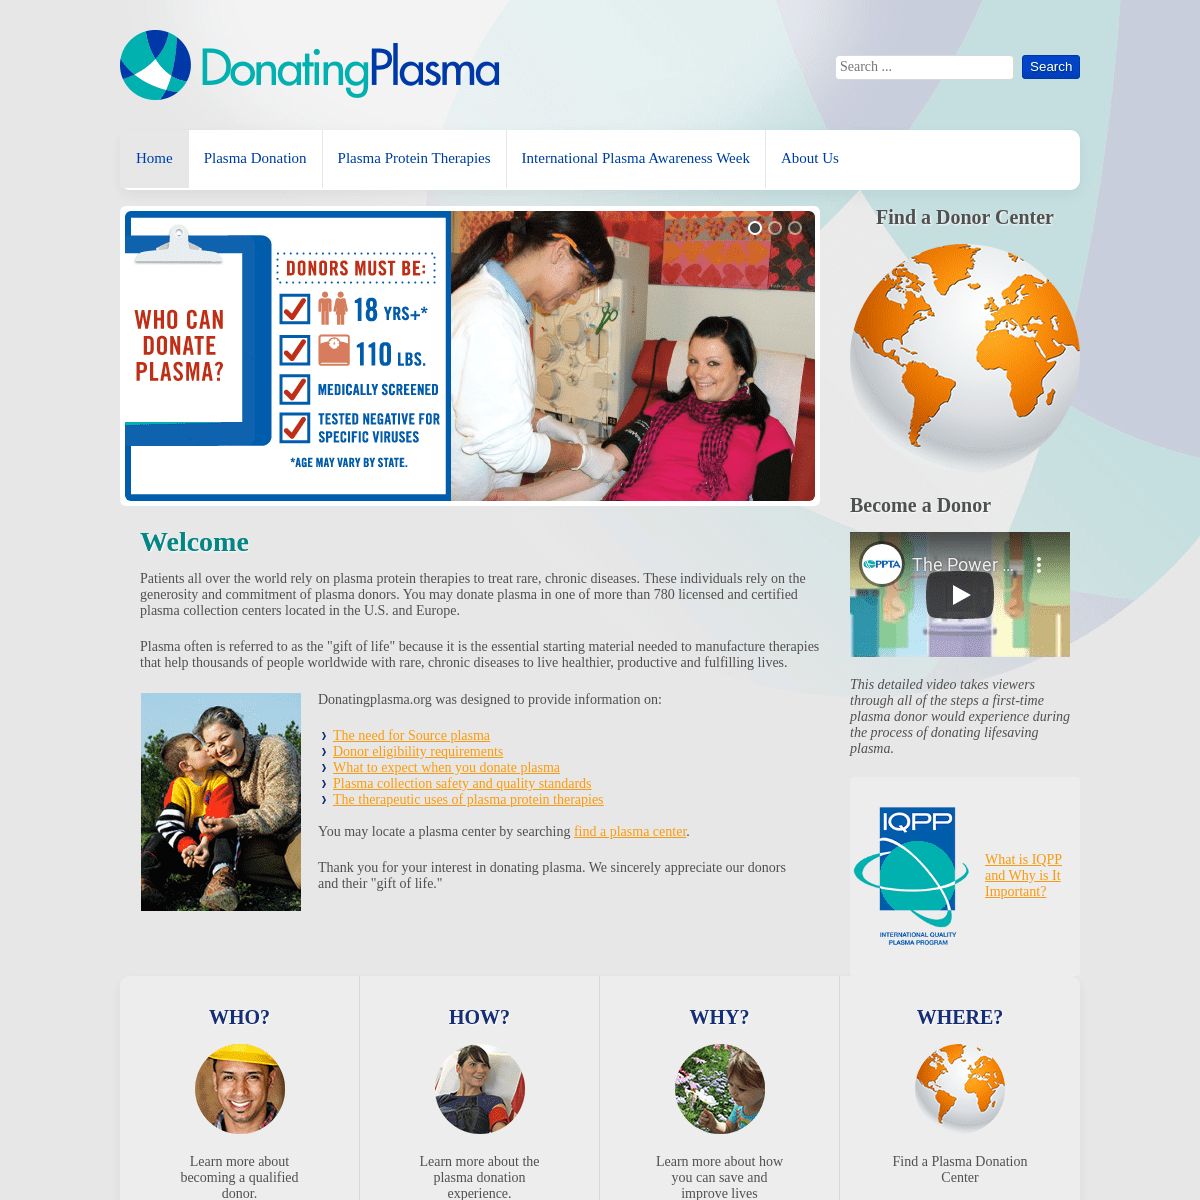 A complete backup of donatingplasma.org